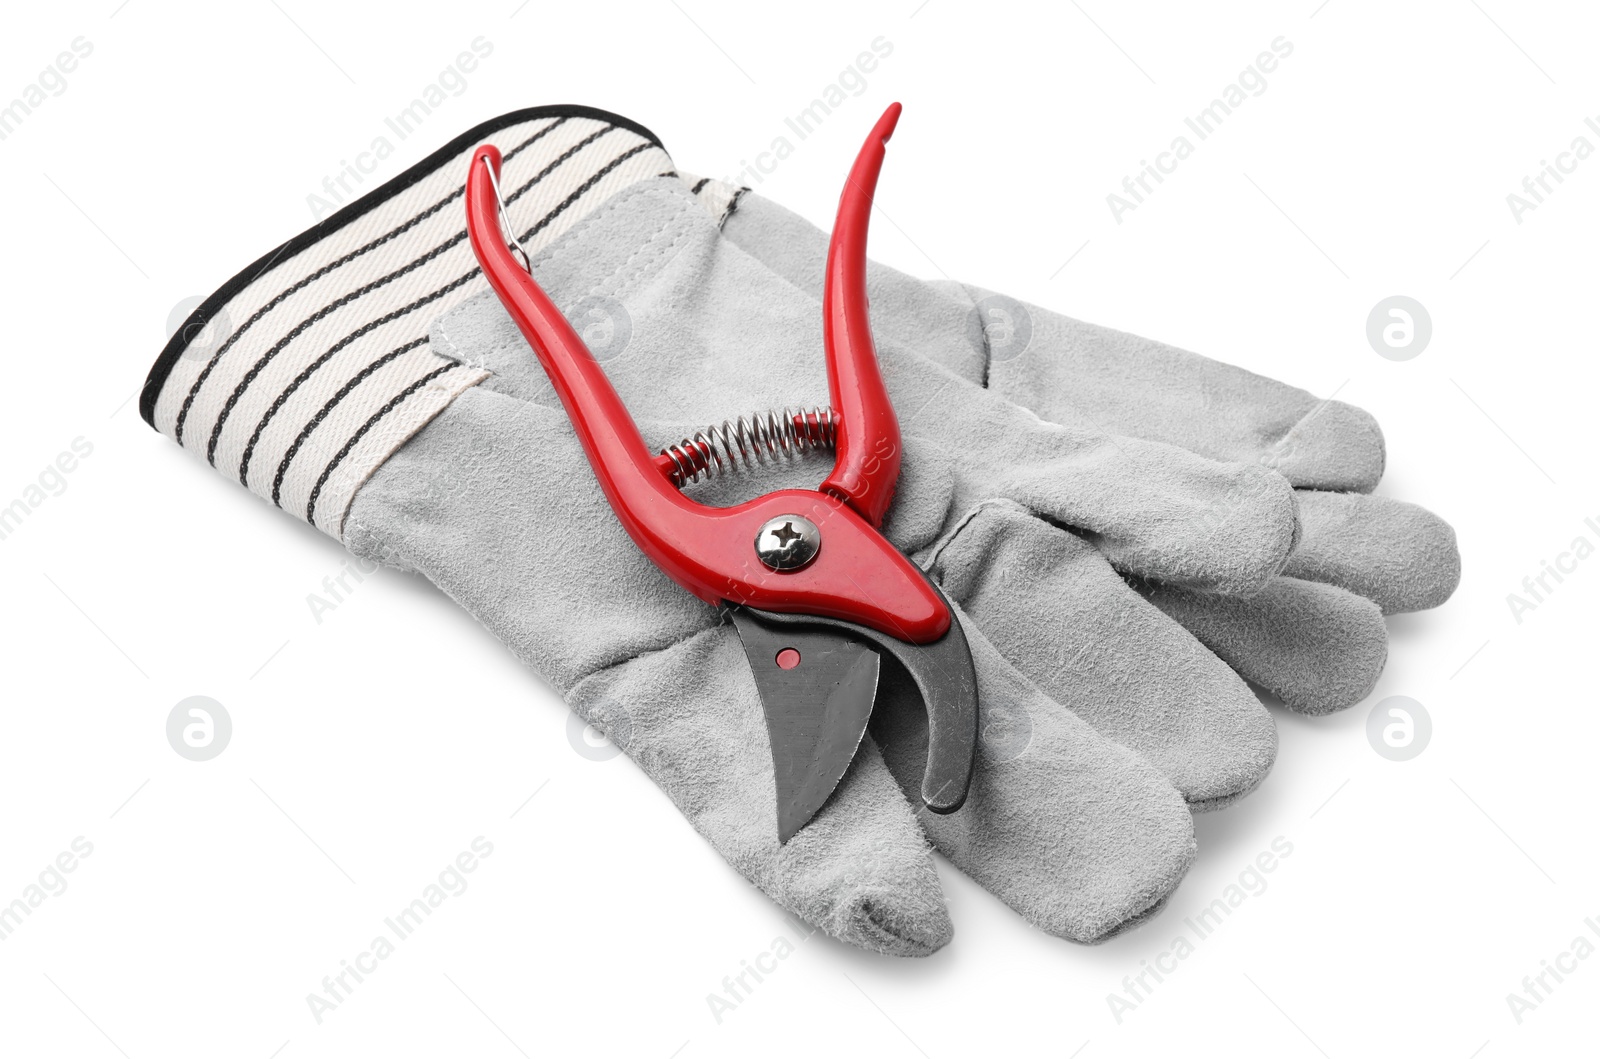 Photo of Pair of gardening gloves and secateurs isolated on white